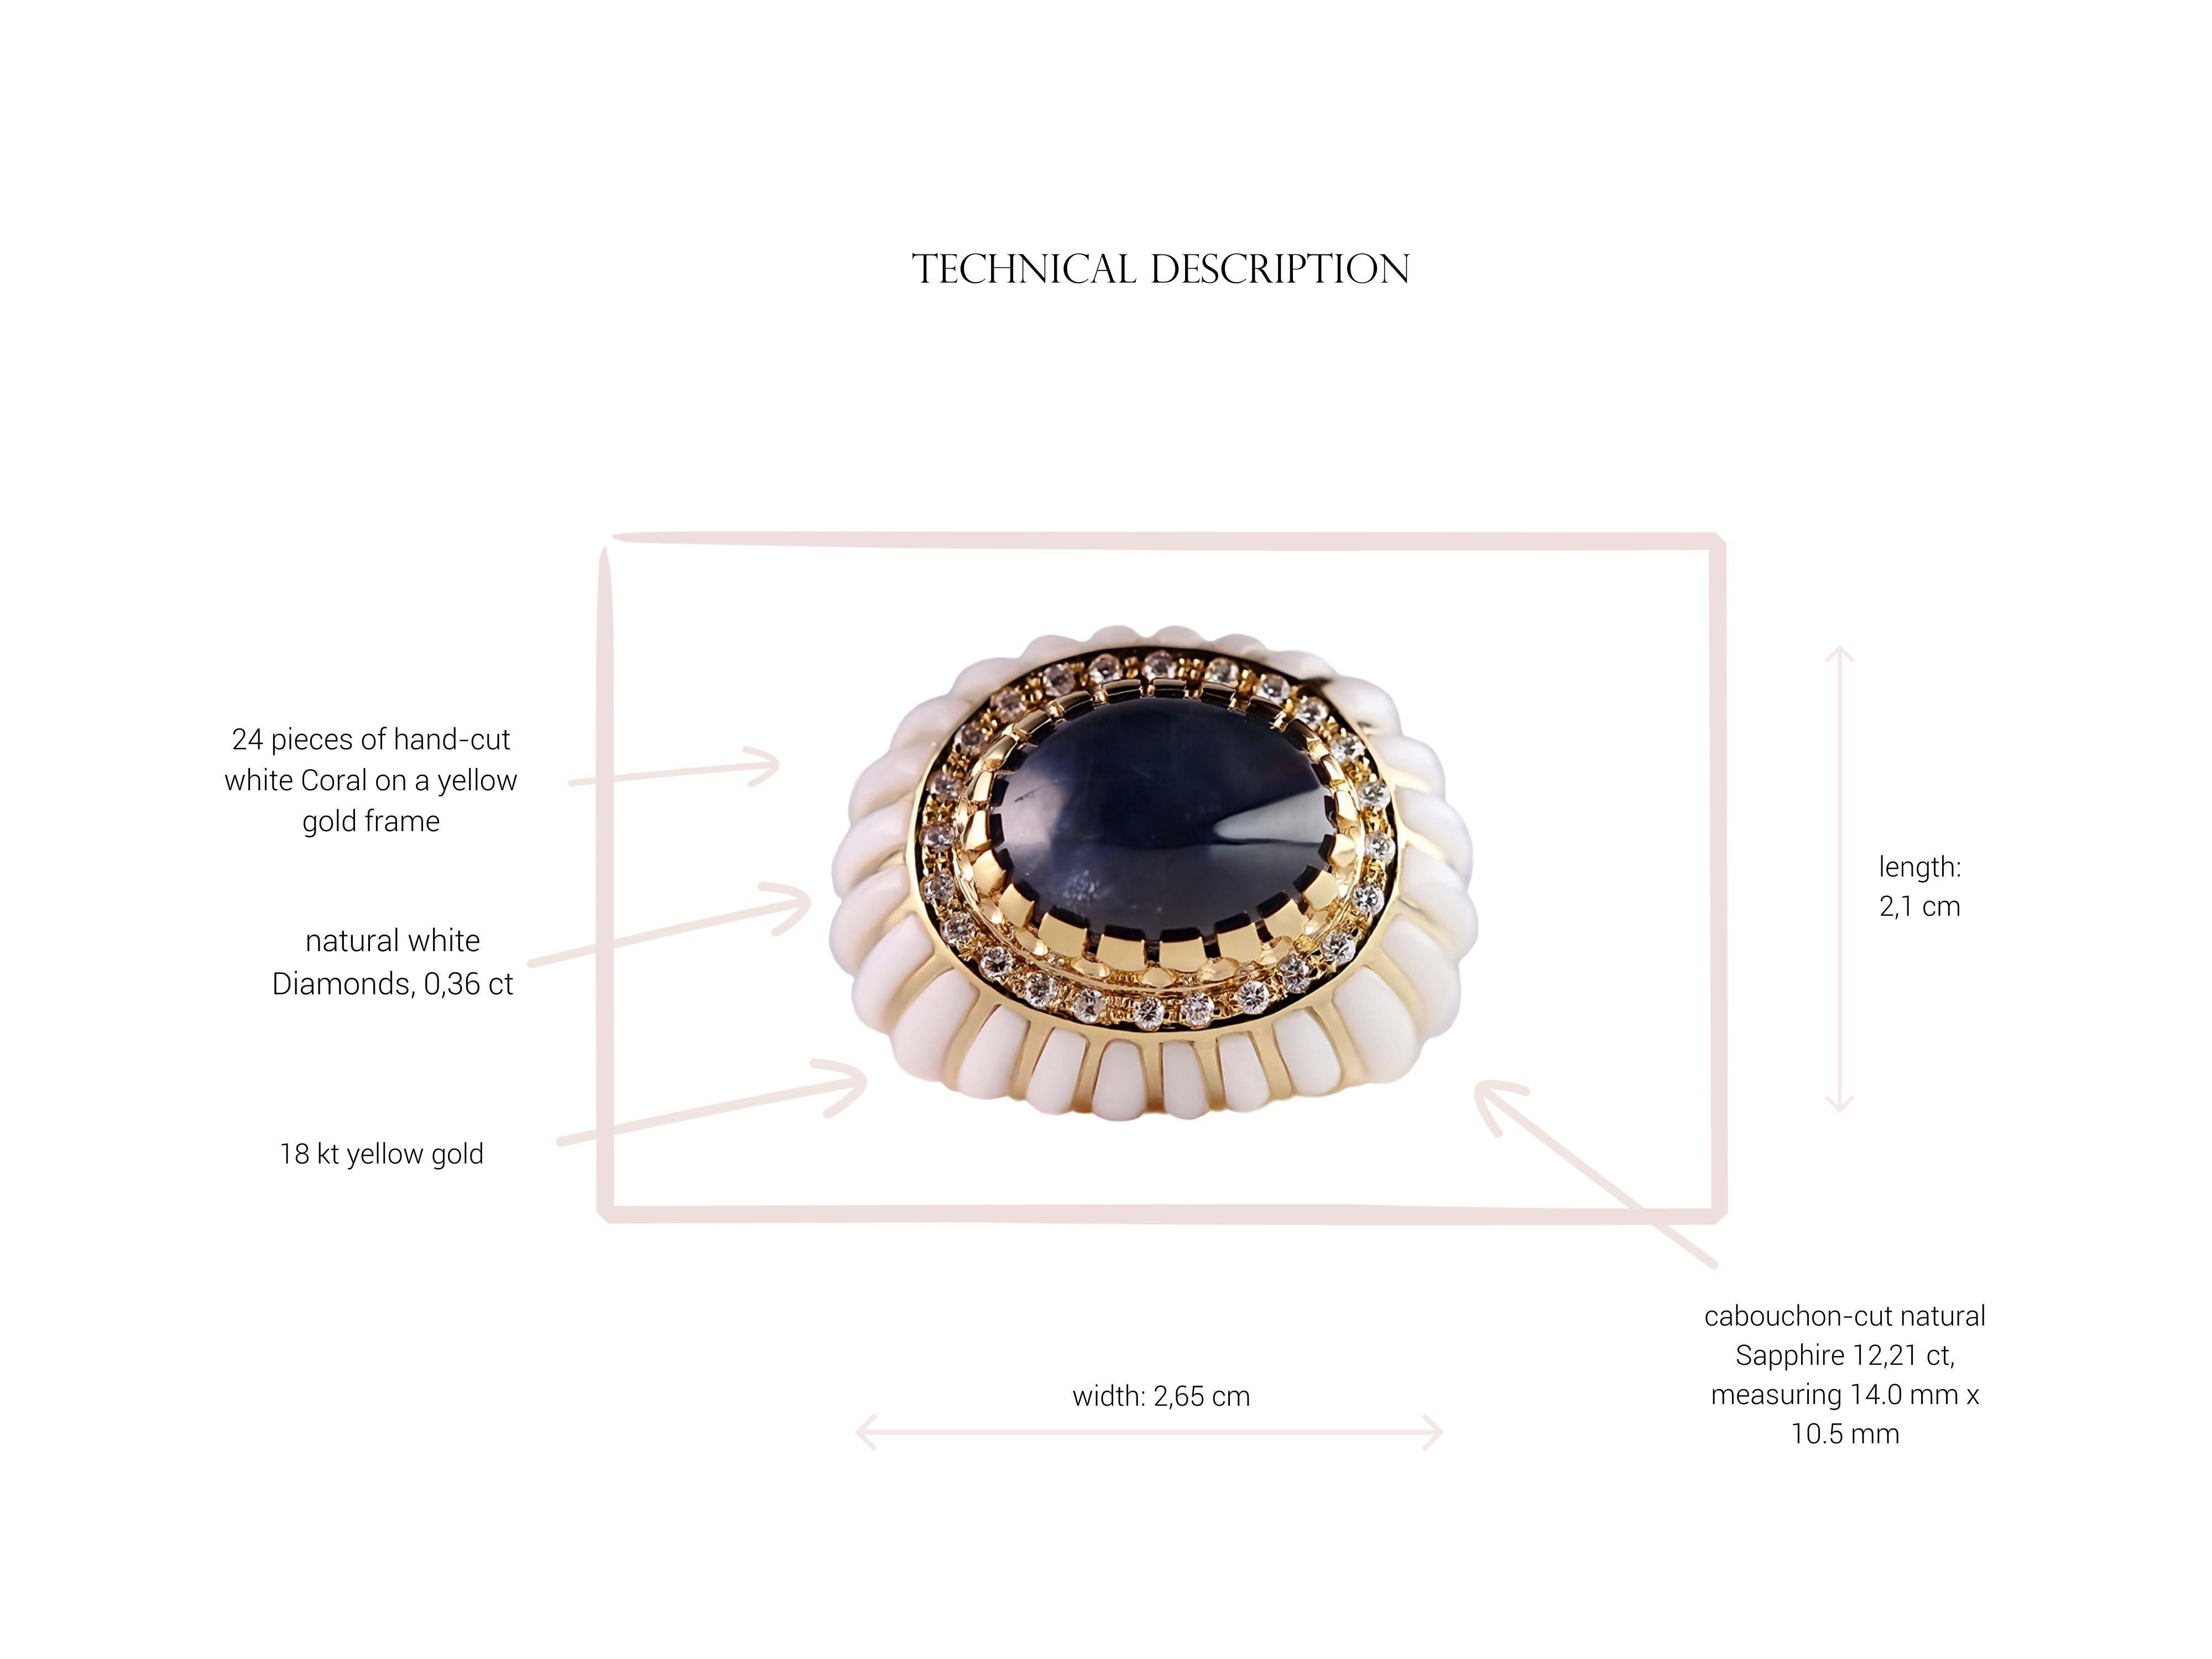 Classy 18kt Yellow Gold Ring with 12.21 ct Cabochon Sapphire and White Coral For Sale 3